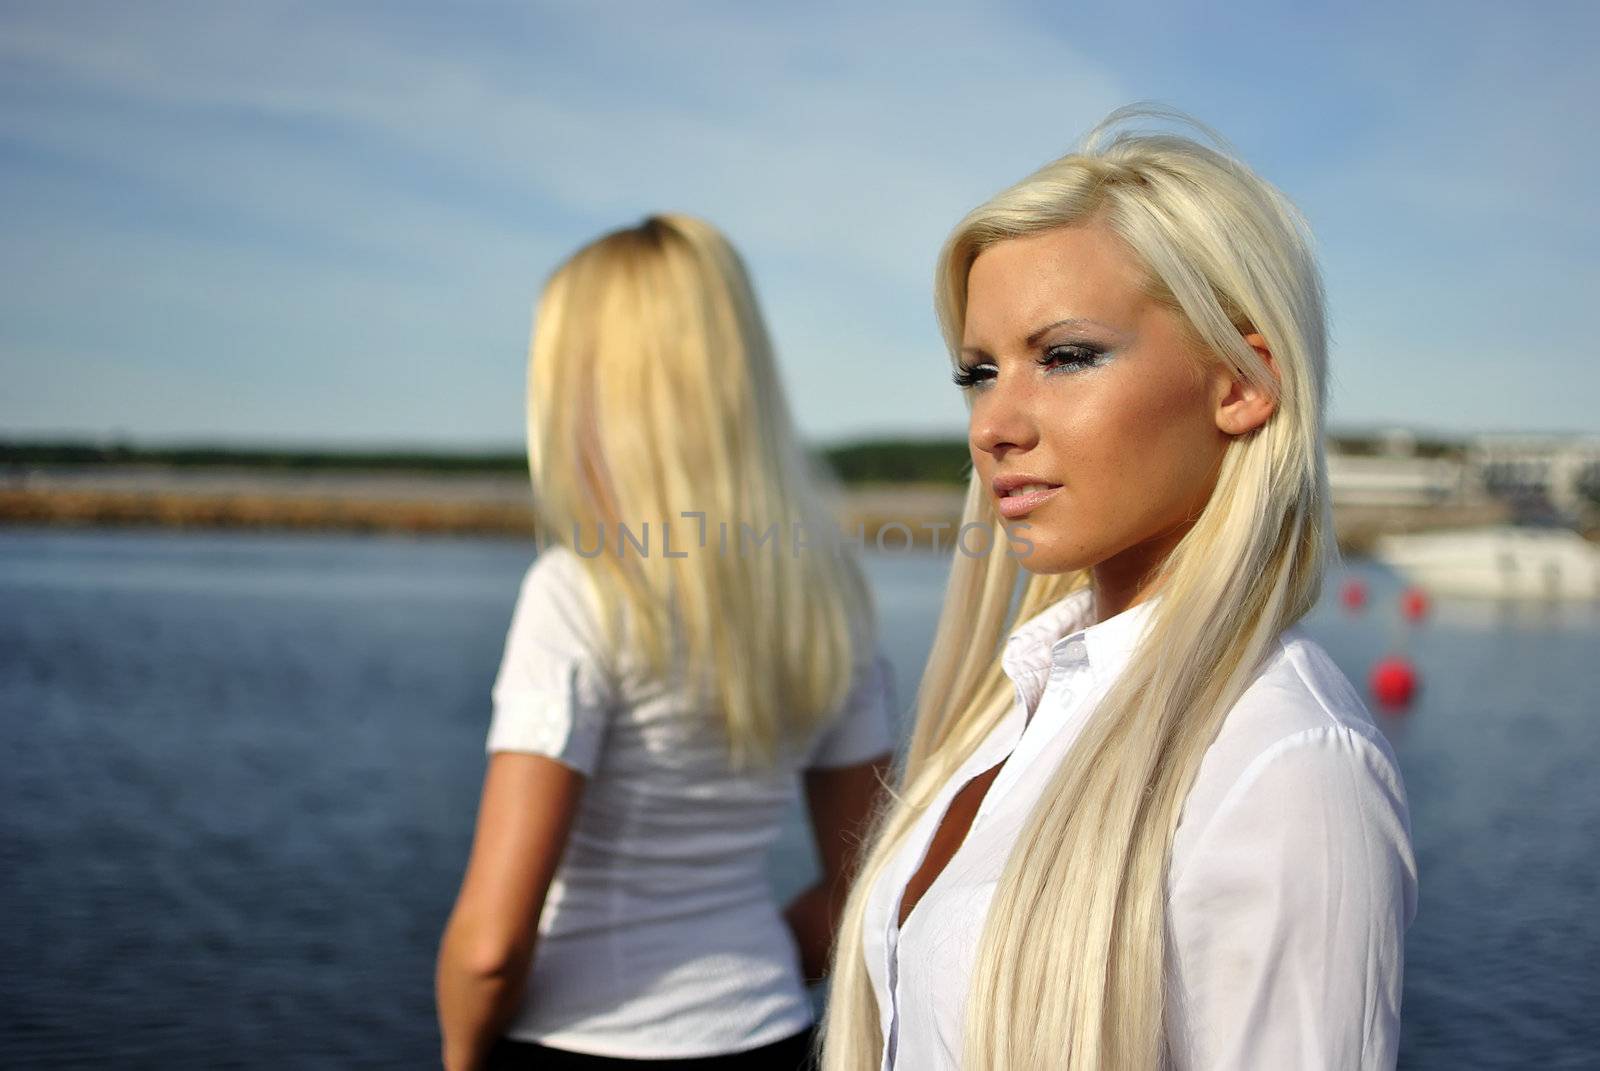 Two blonde girls on the beach. One is blurred. Out of focus.